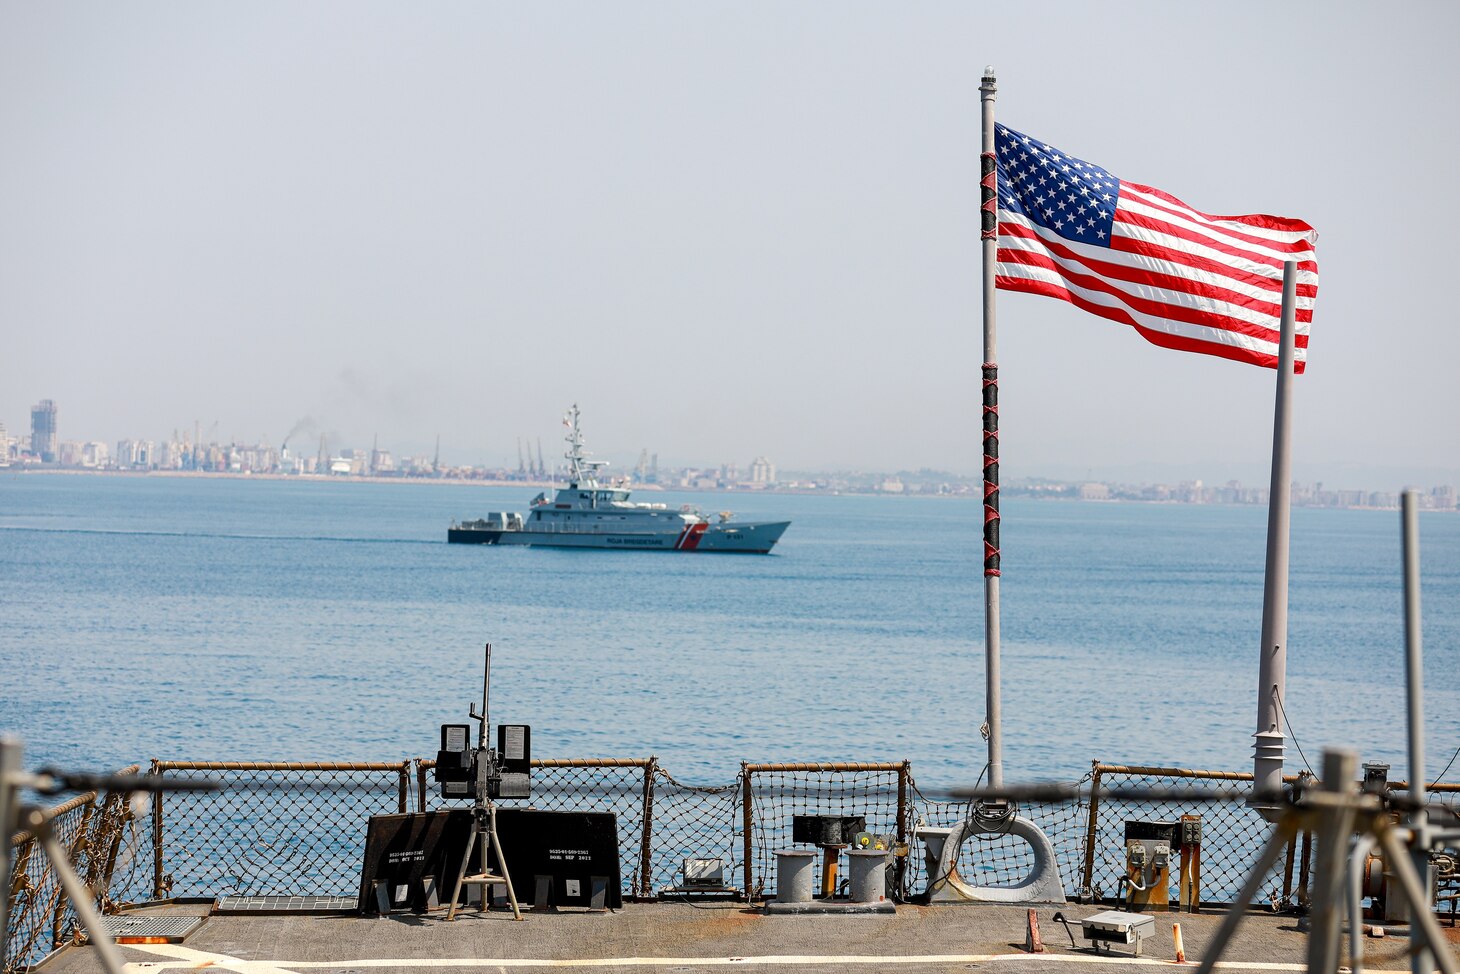 The Arleigh Burke-class guided-missile destroyer USS Ramage (DDG 61) – part of Carrier Strike Group (CSG) 12, Gerald R. Ford CSG, arrived in Durrës, Albania for a regularly scheduled port visit July 20, 2023.